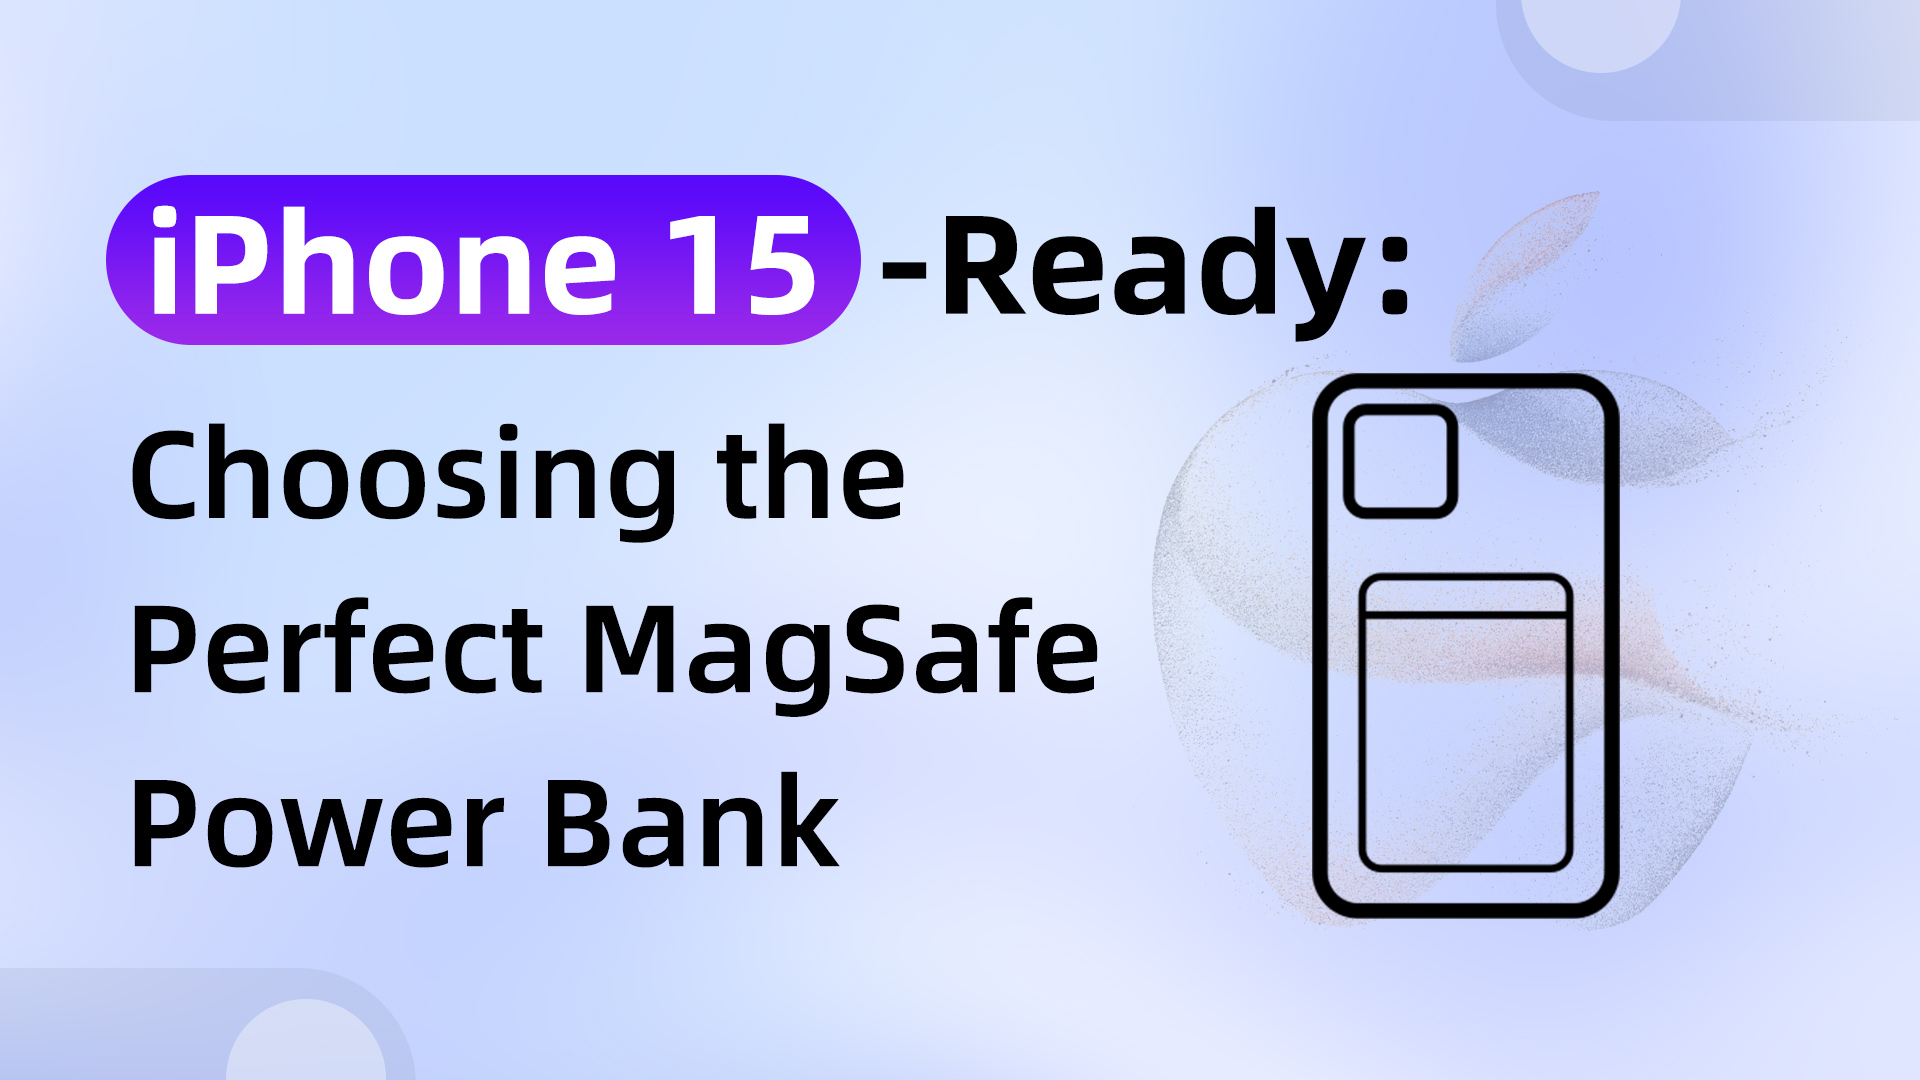 iPhone 15-Ready: Choosing the Perfect MagSafe Power Bank - Chargerlab